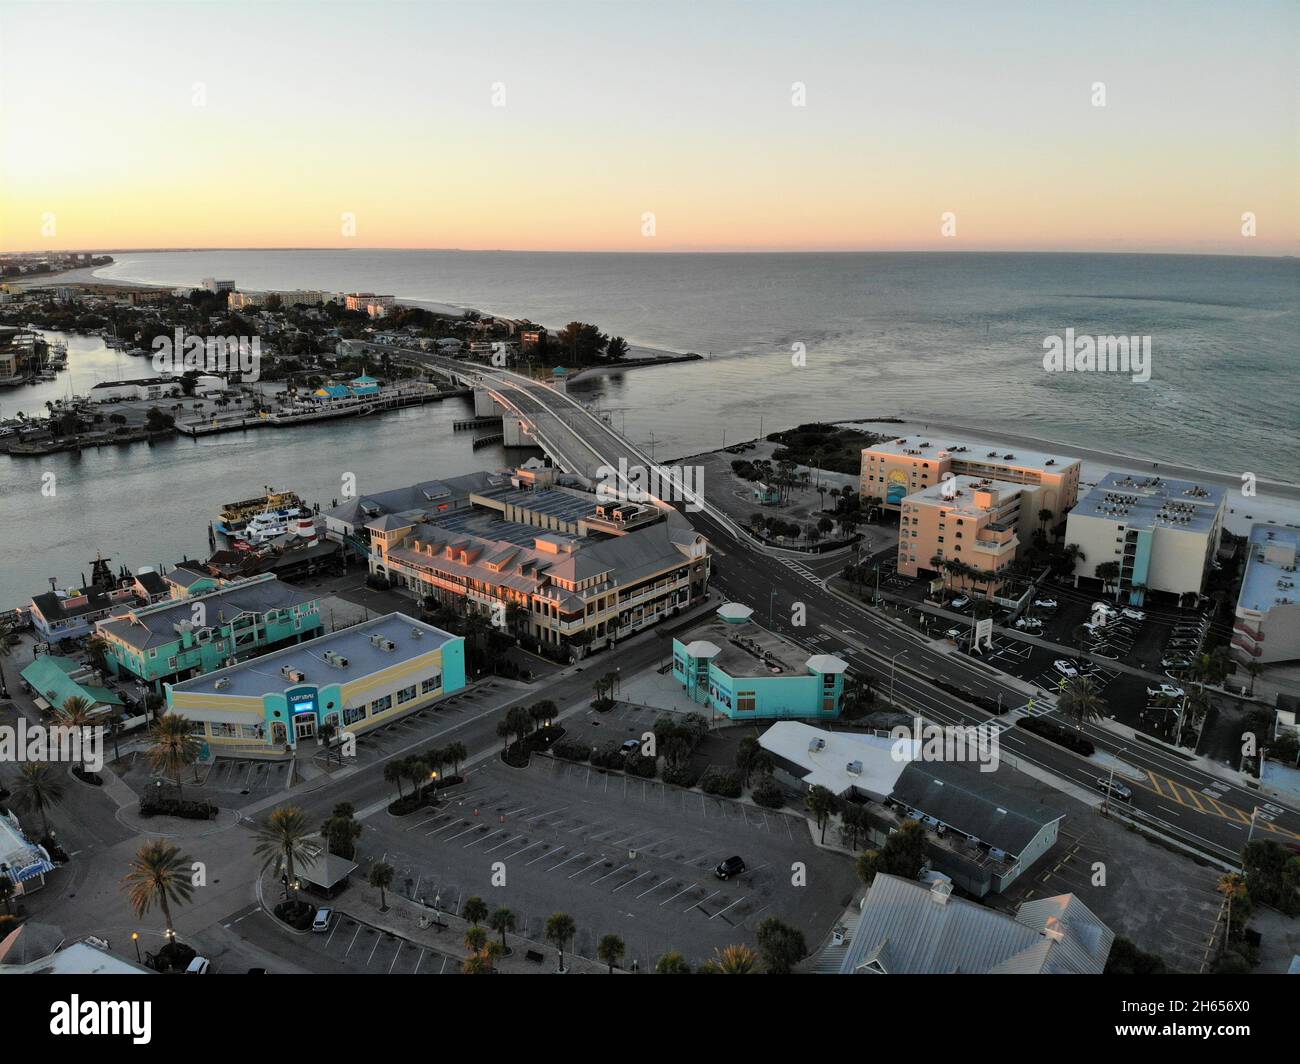 The aerial view during early morning near John Pass, Madeira Beach, Florida, U.S.A Stock Photo